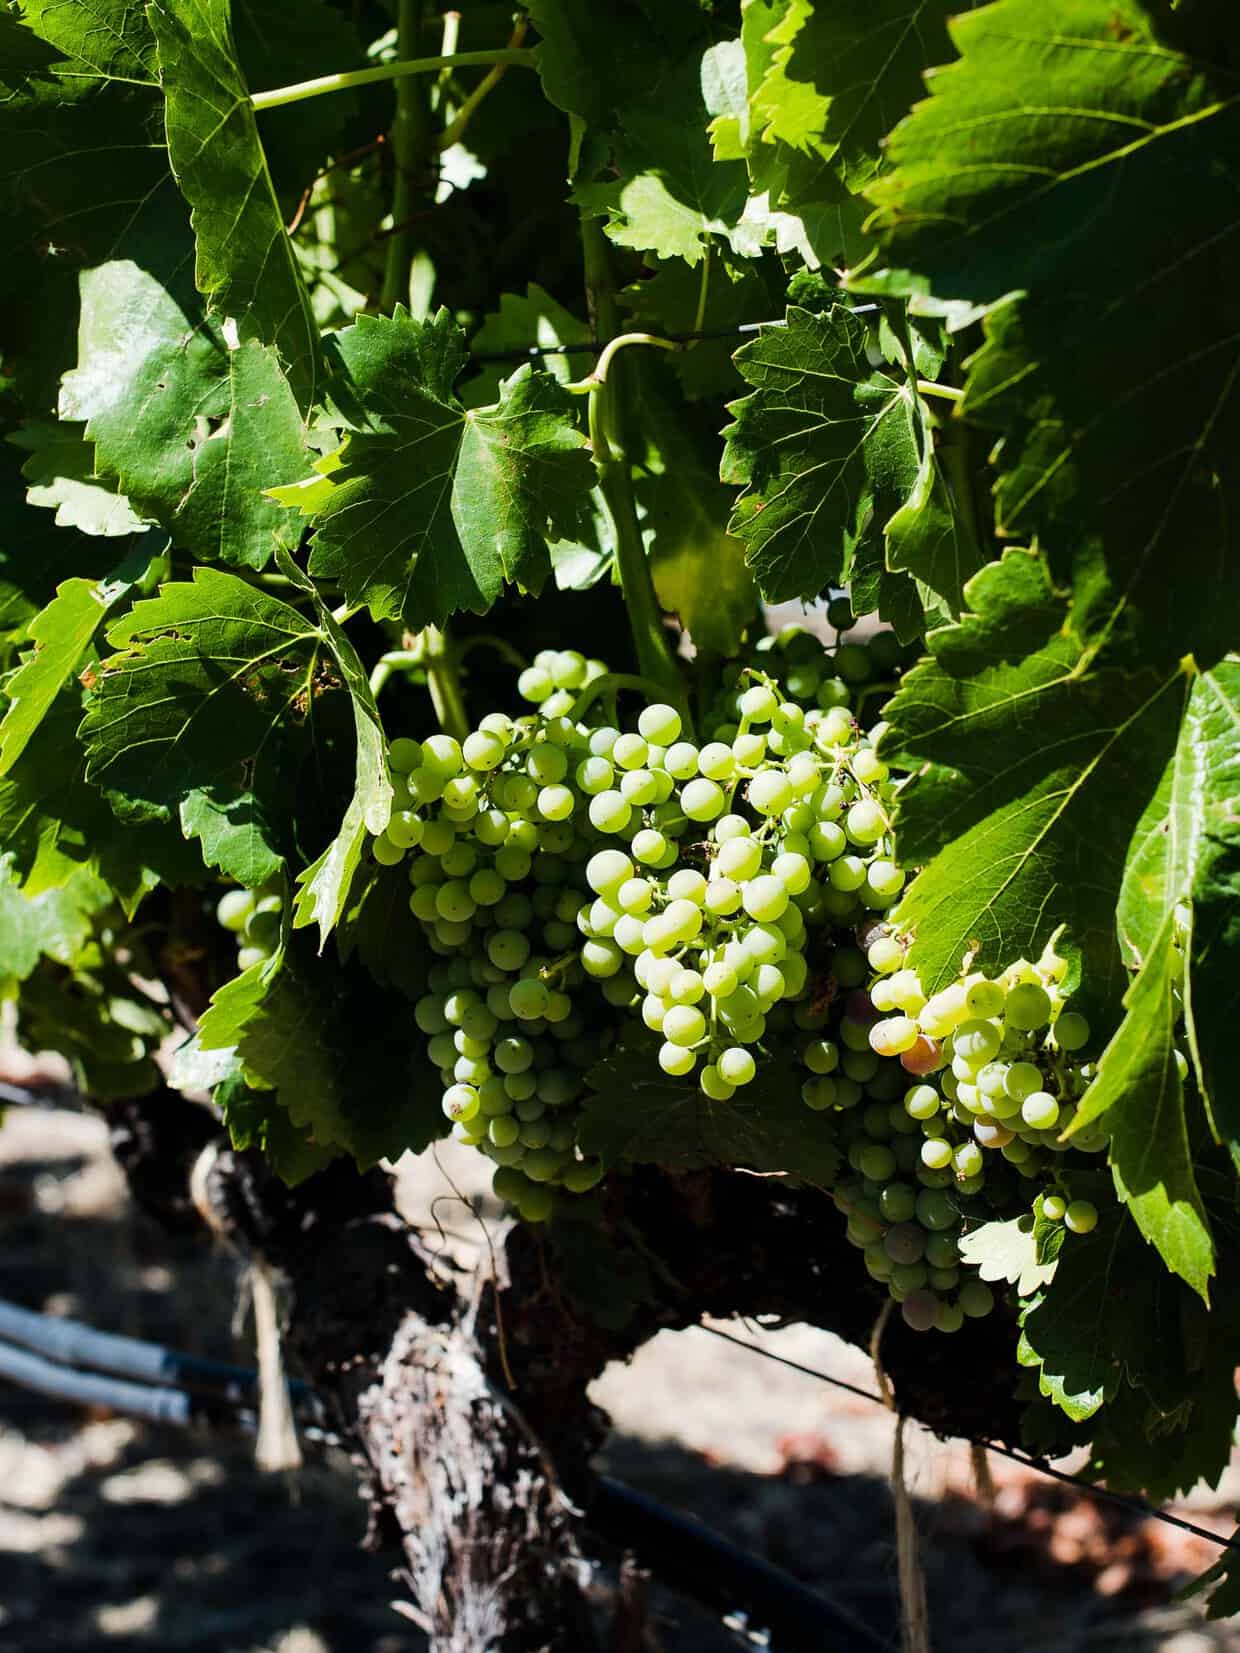 Green grapes growing on the vine at a winery.